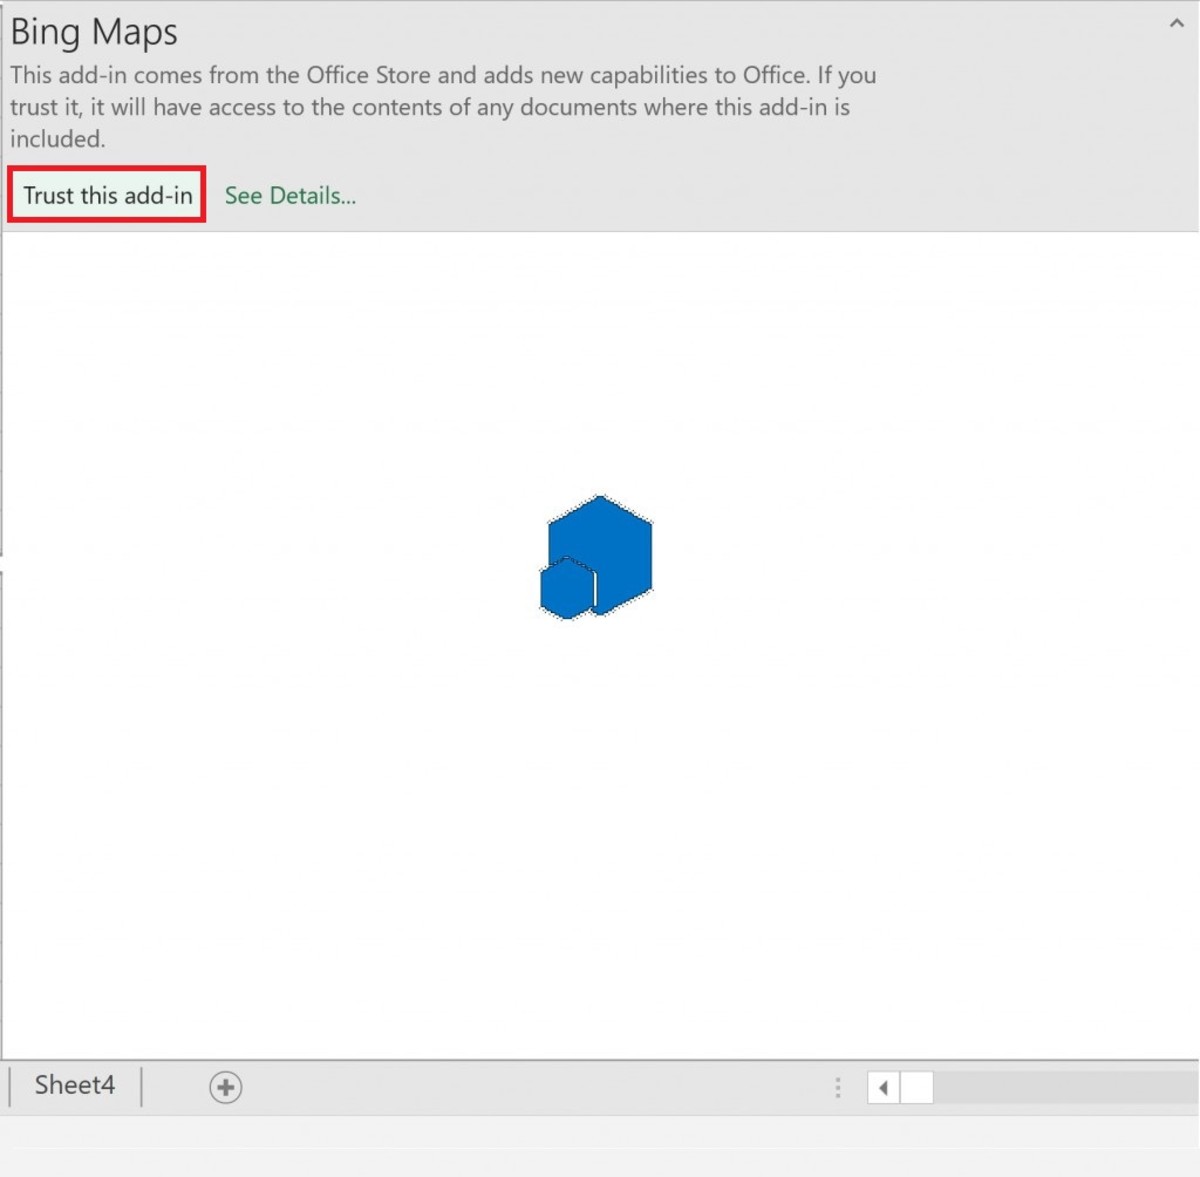 Microsoft has you trust the Bing Maps Add-in to assure that you understand that your data is not private. Remember that the Bing Maps Add-in has access to any content in the workbook that it is running in. 